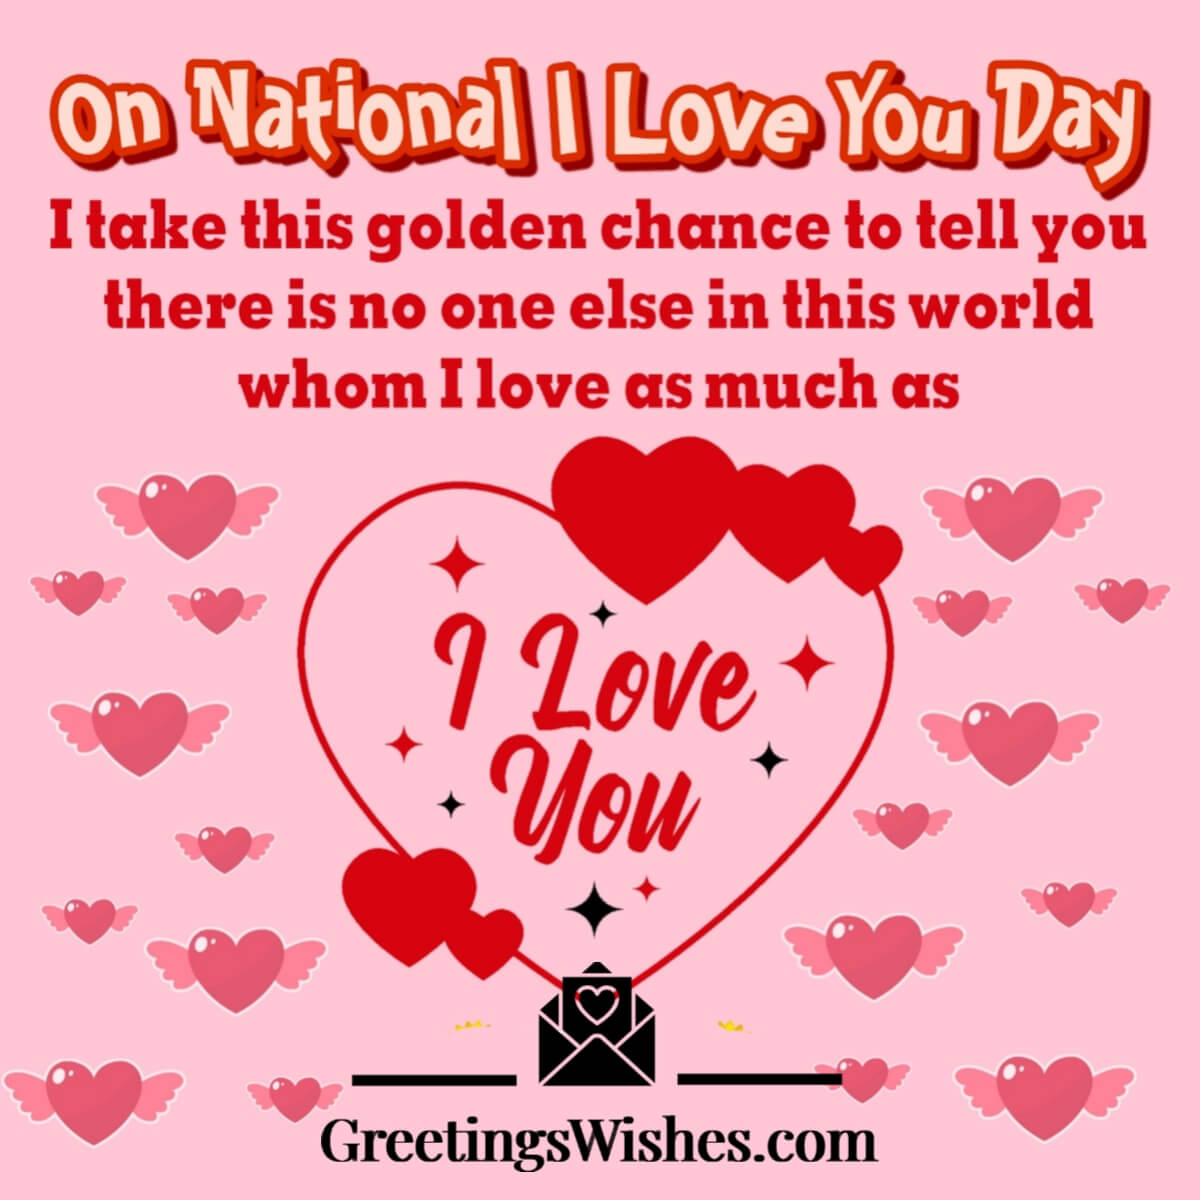 National I Love You Day Messages Wishes 14 October Greetings Wishes